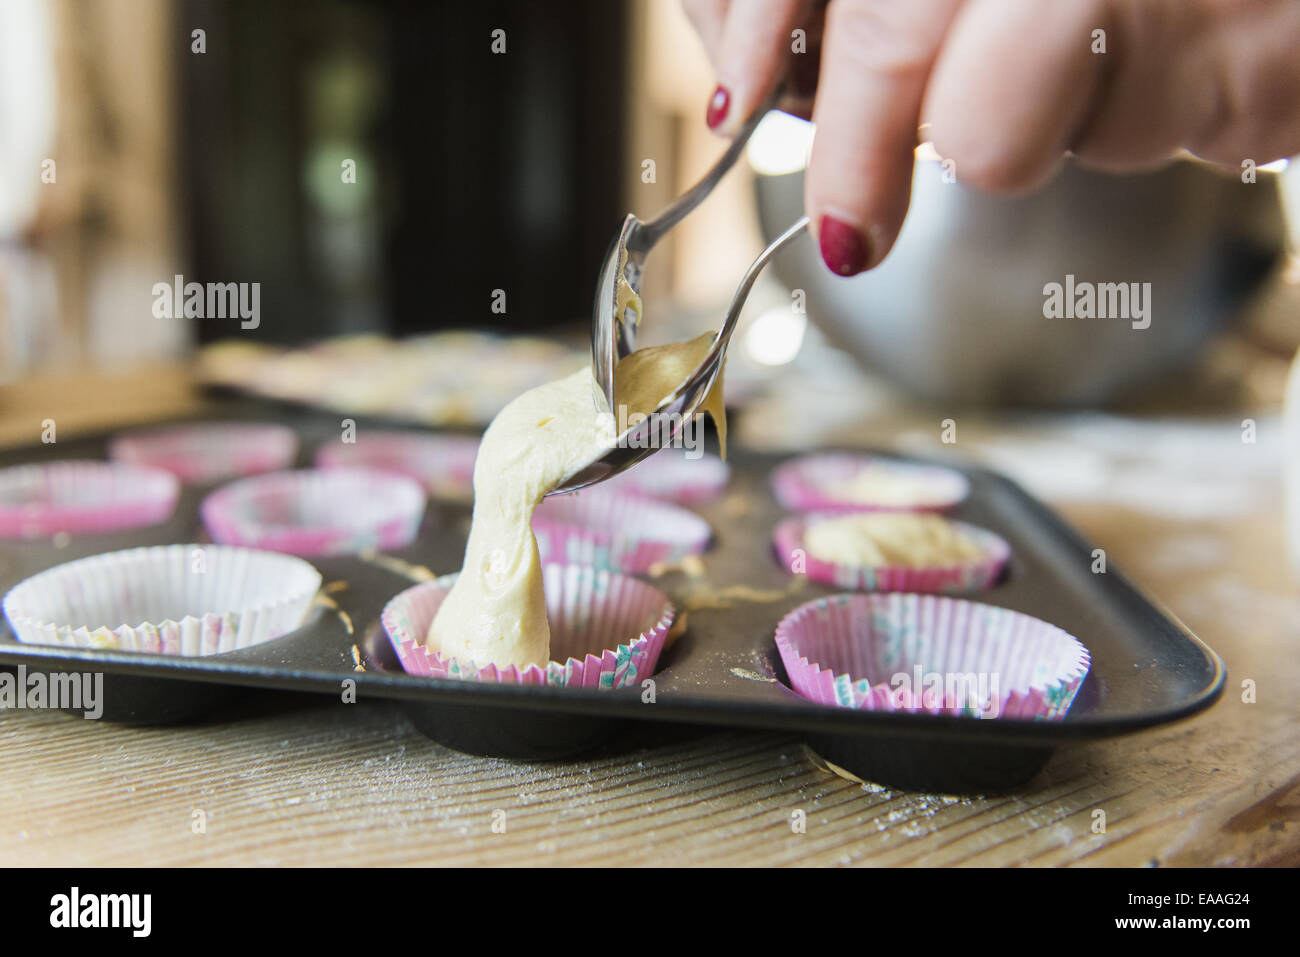 A woman at a kitchen table baking fairy cakes. Stock Photo